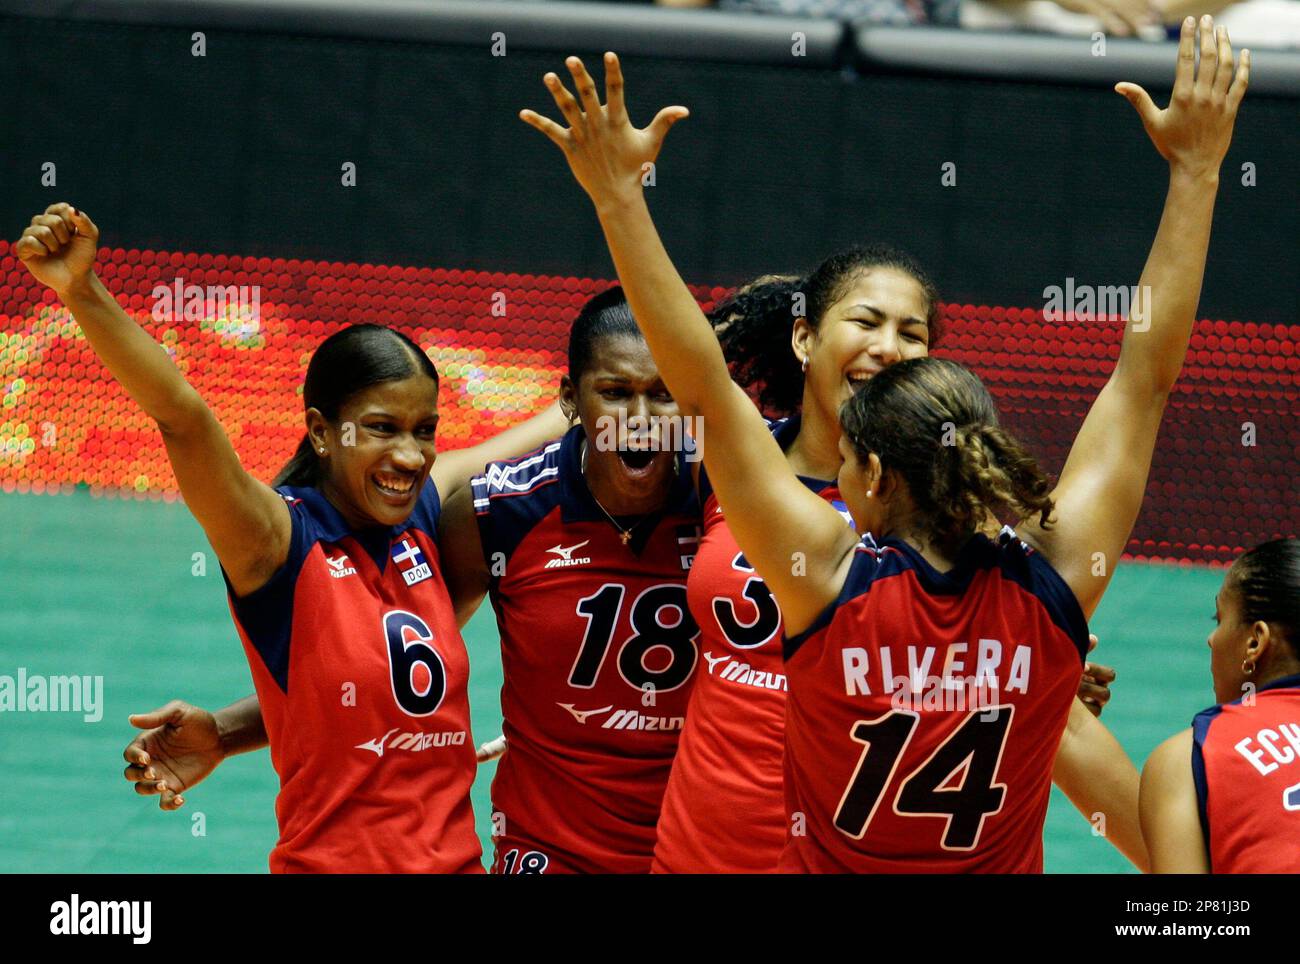 Dominican Republics volleyball players, from left, Ana Binet, Bethania de la Cruz, Lisvel Eve, Prisilla Rivera and Karla Echenique celebrate their victory over Puerto Rico and winning the gold medal at the